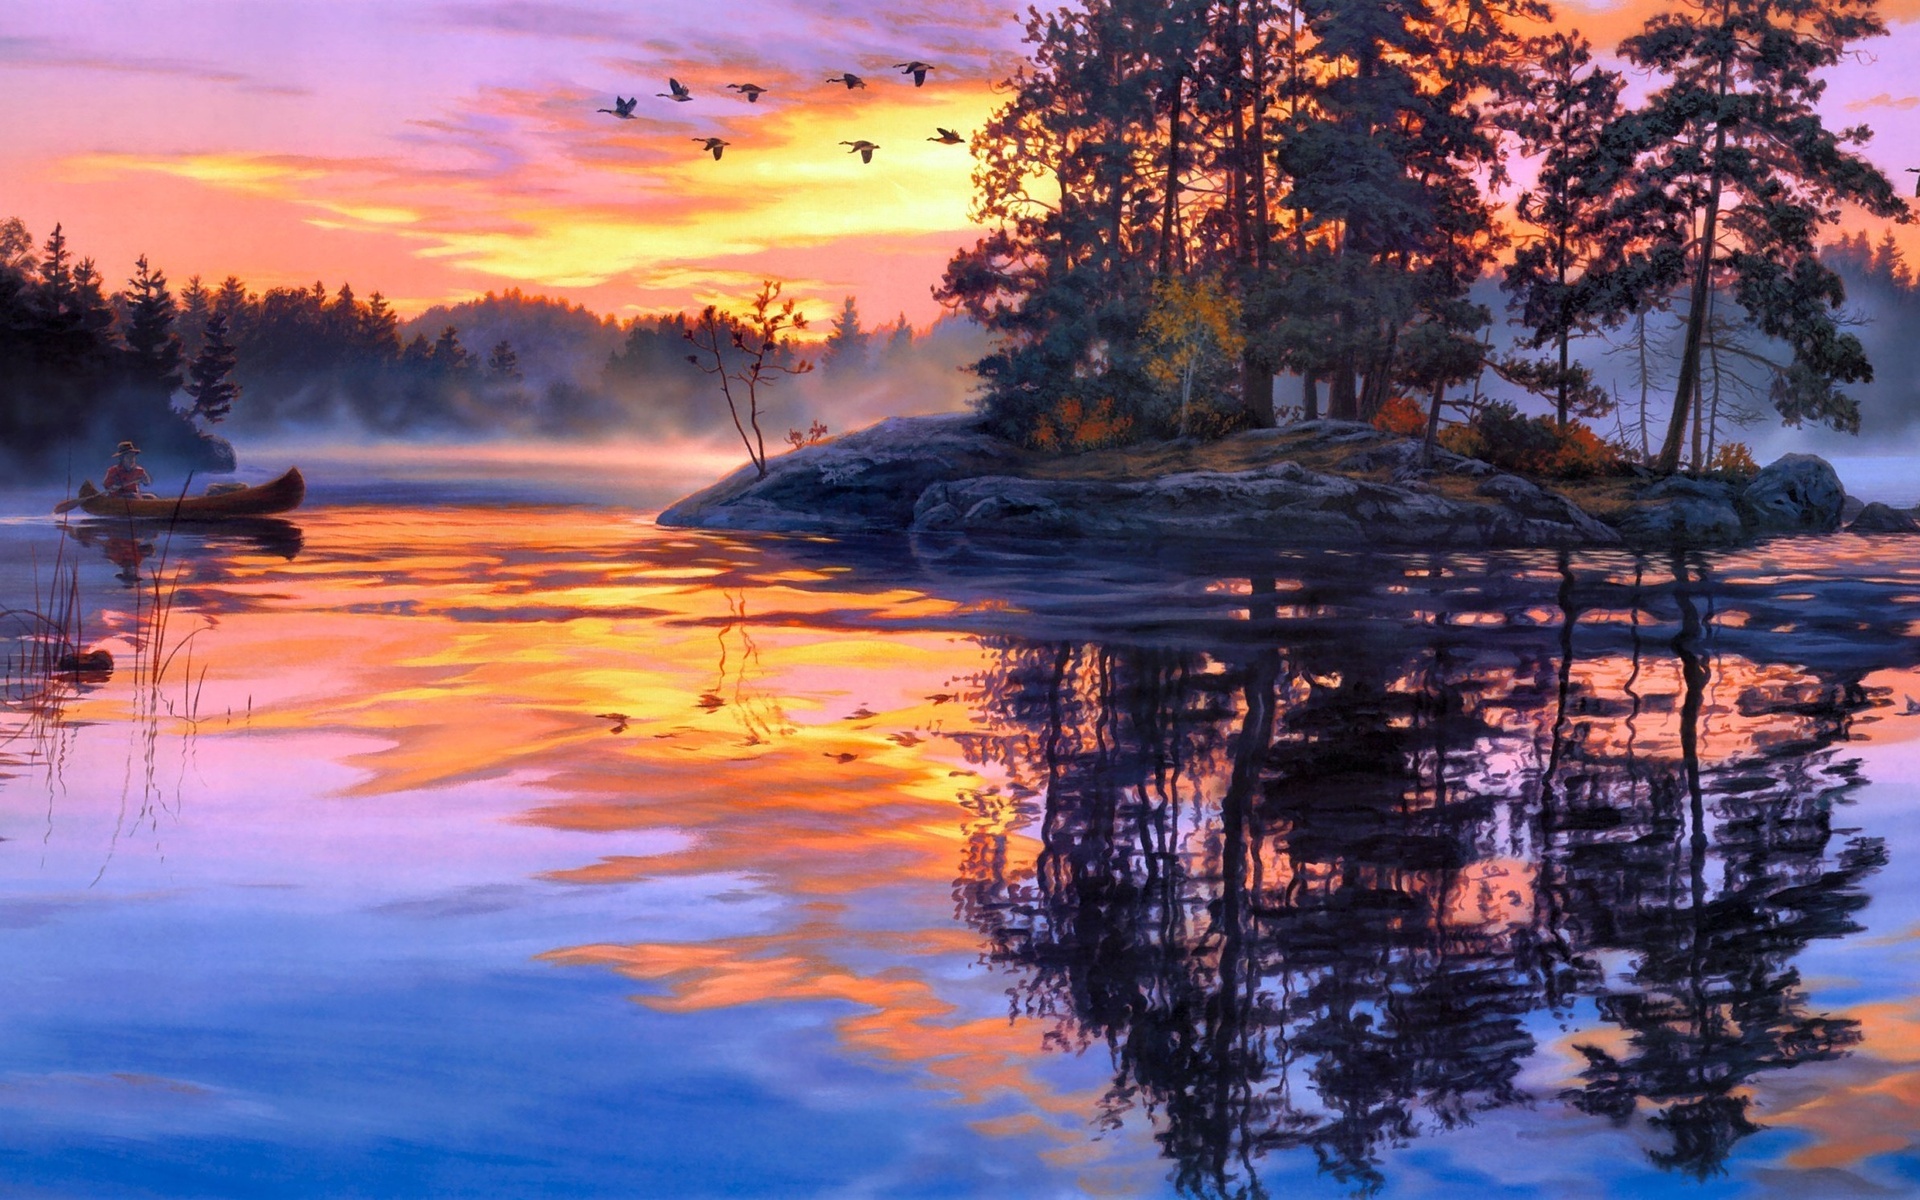 Darrell Bush Art Paintings Lakes Water Reflection Sky Clouds Sunset